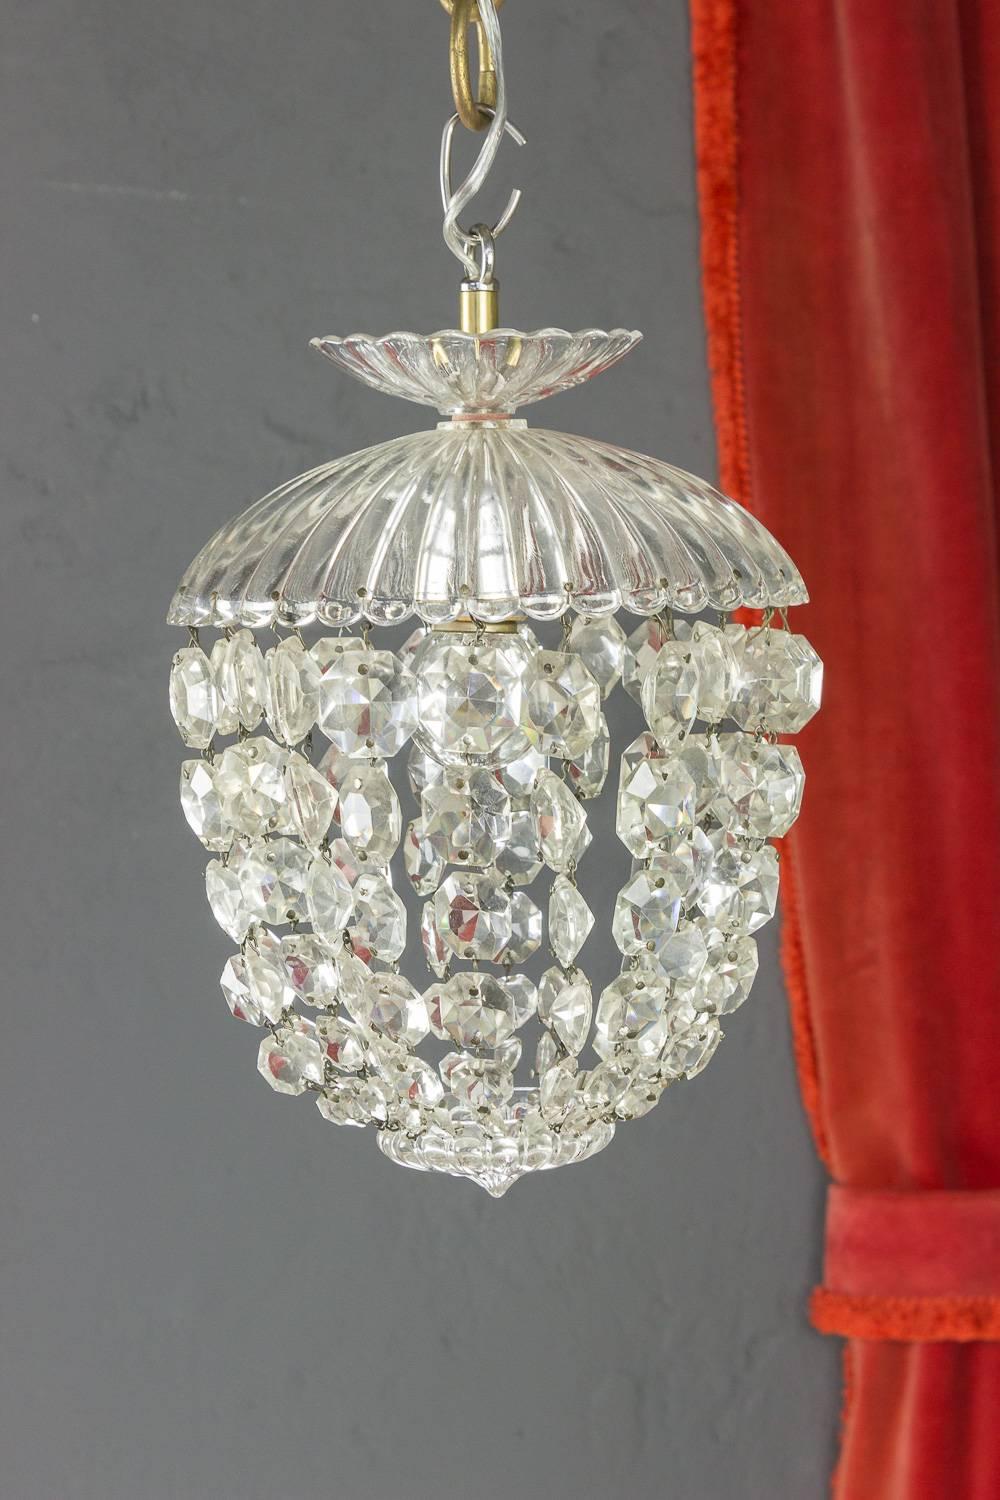 Small French glass and crystal pendant ceiling fixture, circa 1940s.